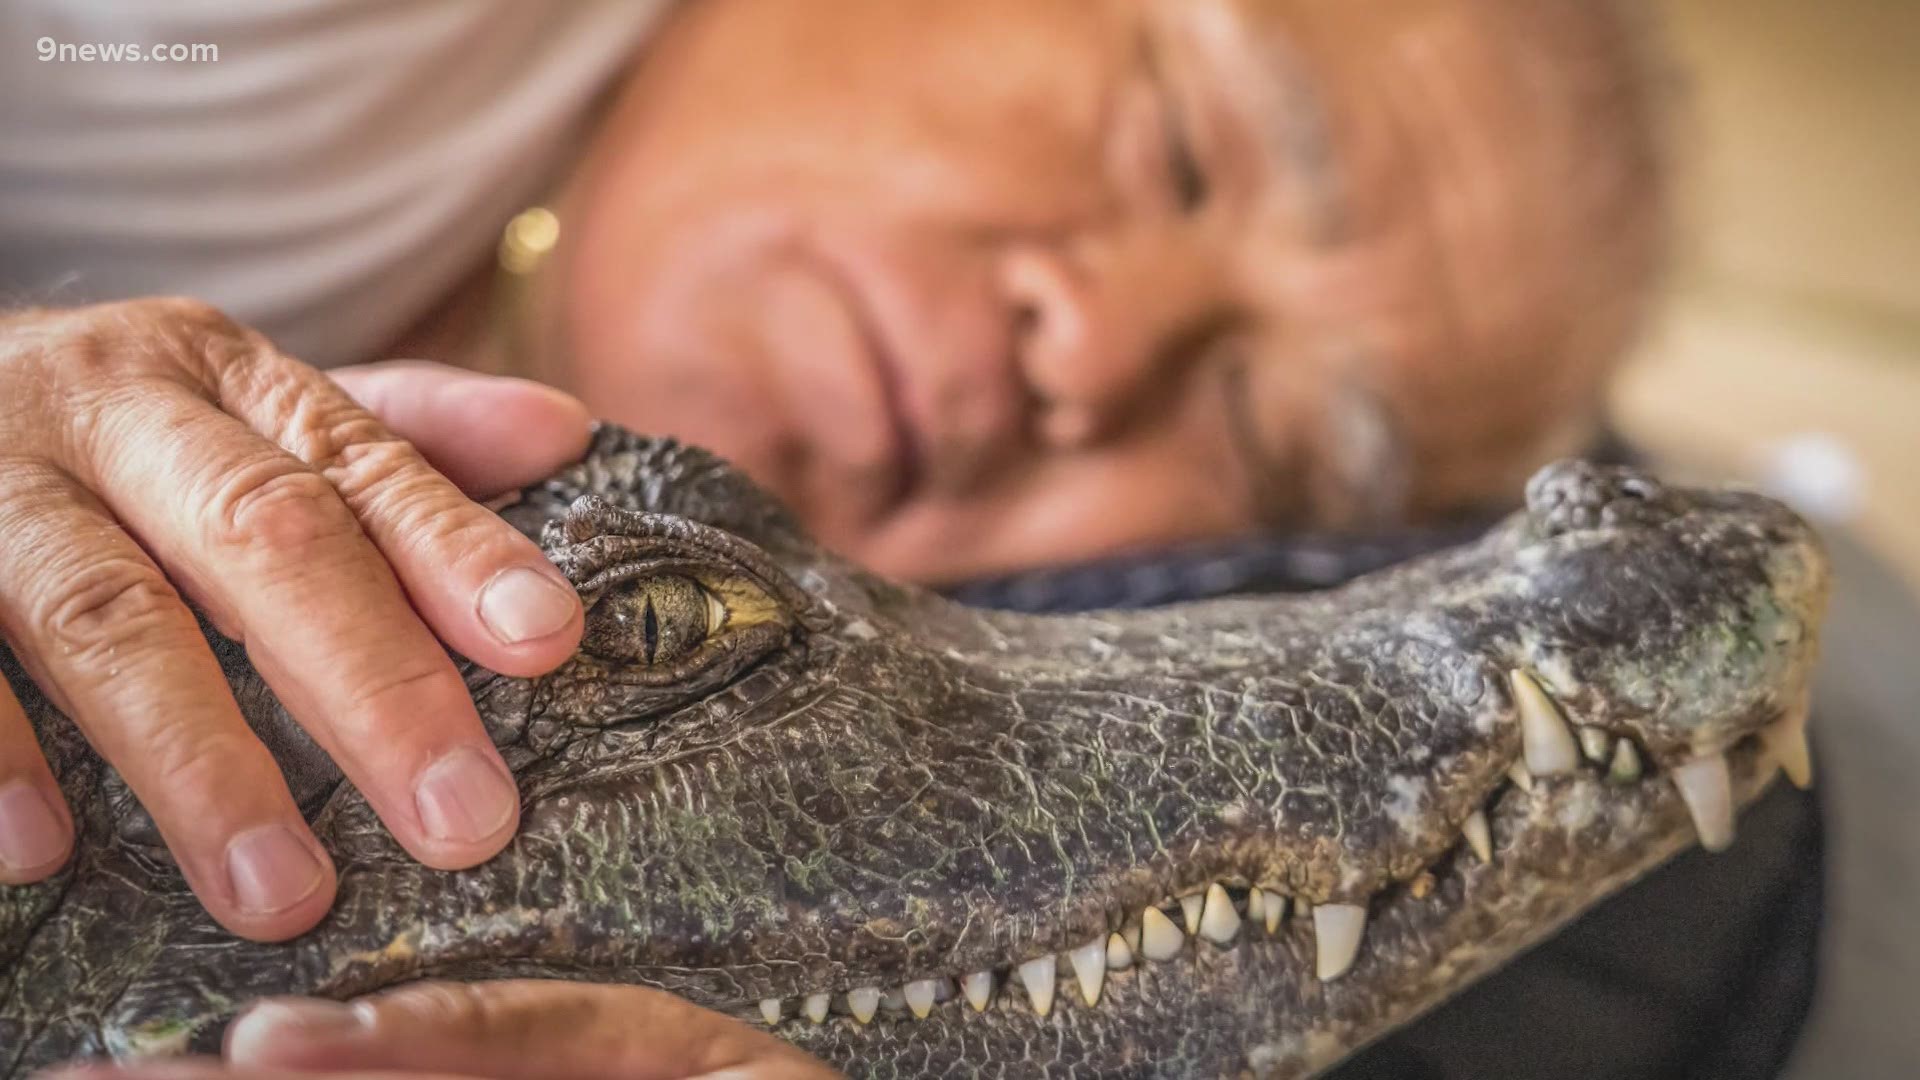 An 8-foot alligator started out as a little pet – 38 years later, the cayman still shares a bed with its owner in Japan.